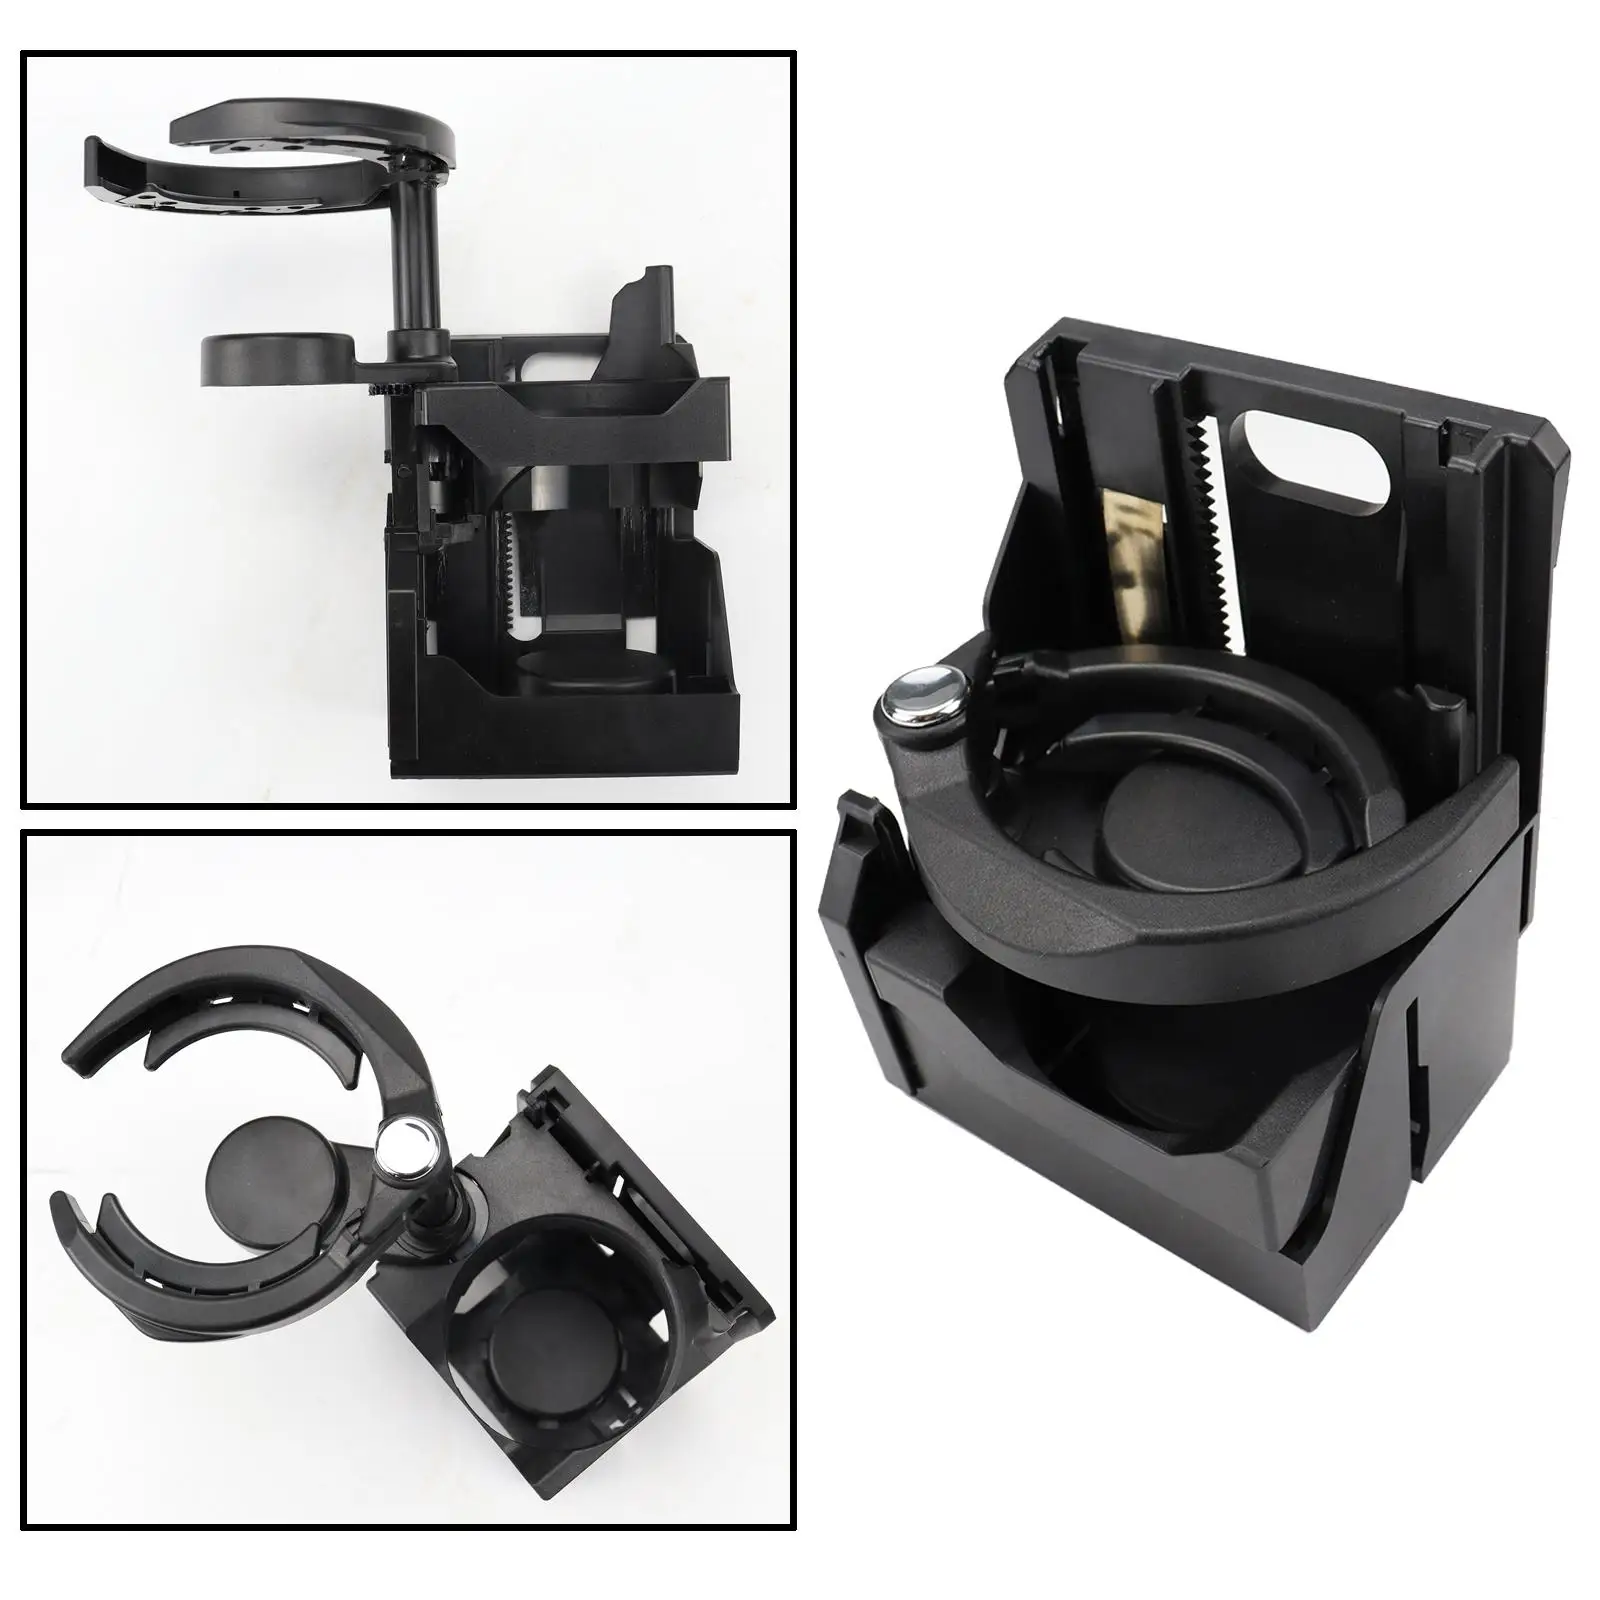 66920101 Organizers 210 680 01 14 6 6 92 0101 Storage Cup Holder 2106800114 Fit for W210 Interior Parts Car Parts